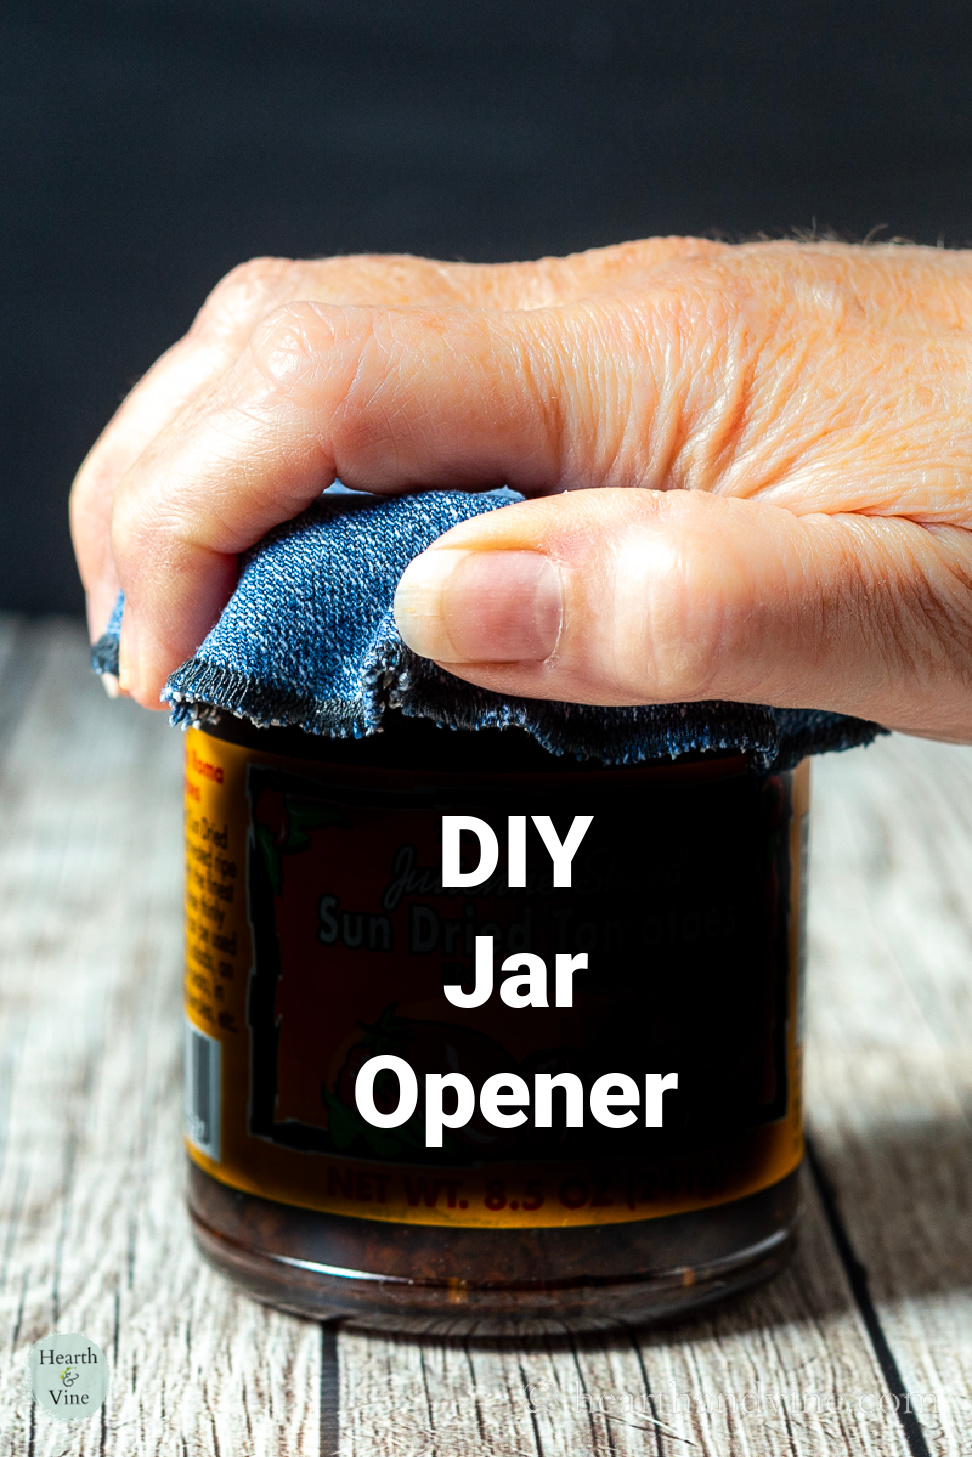 Hand using a rubber jar opener on a small jar.